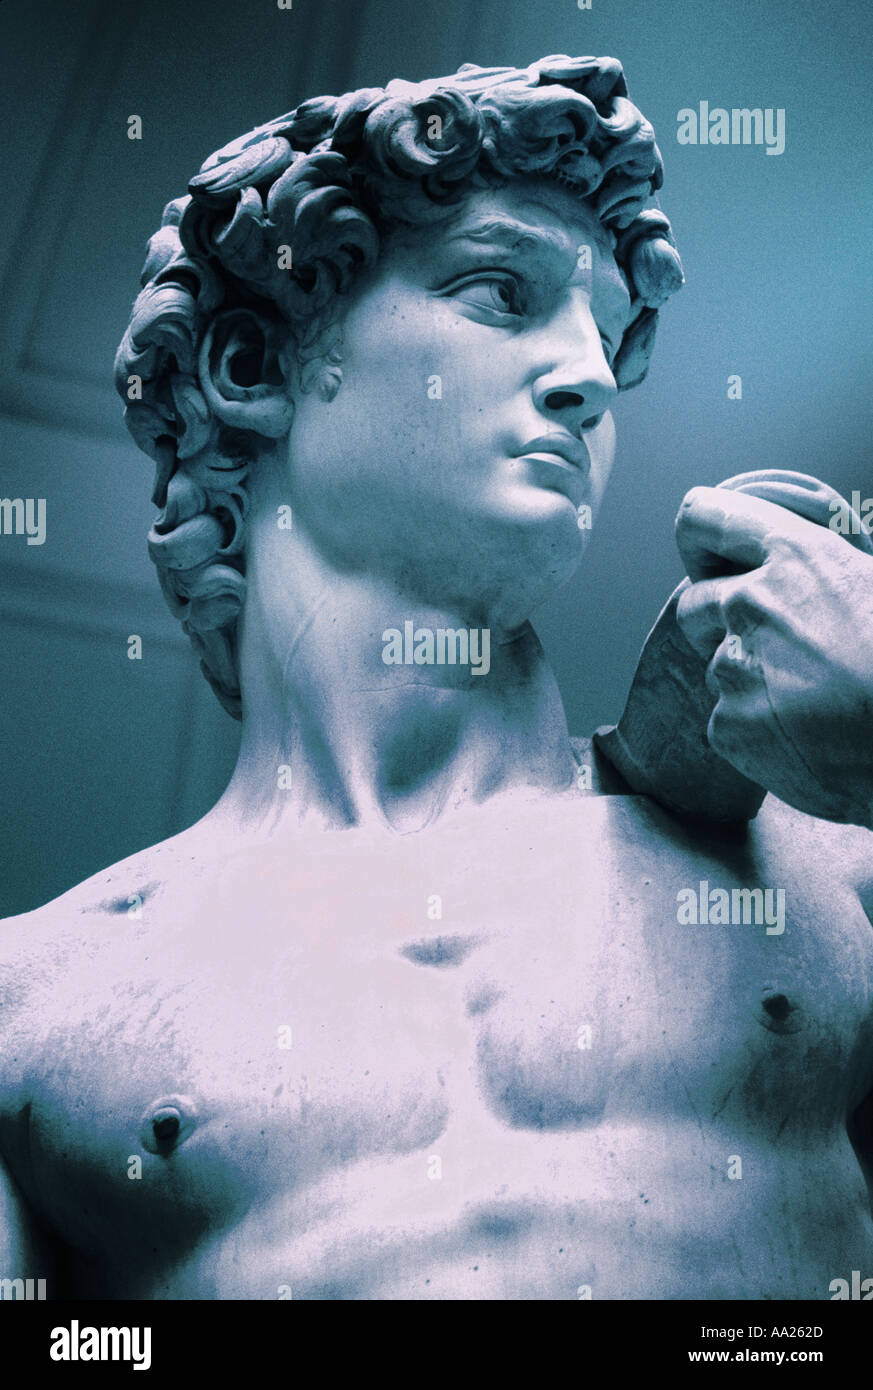 detail of the David by Michelangelo in the Galleria della Accademia Florence Italy Stock Photo